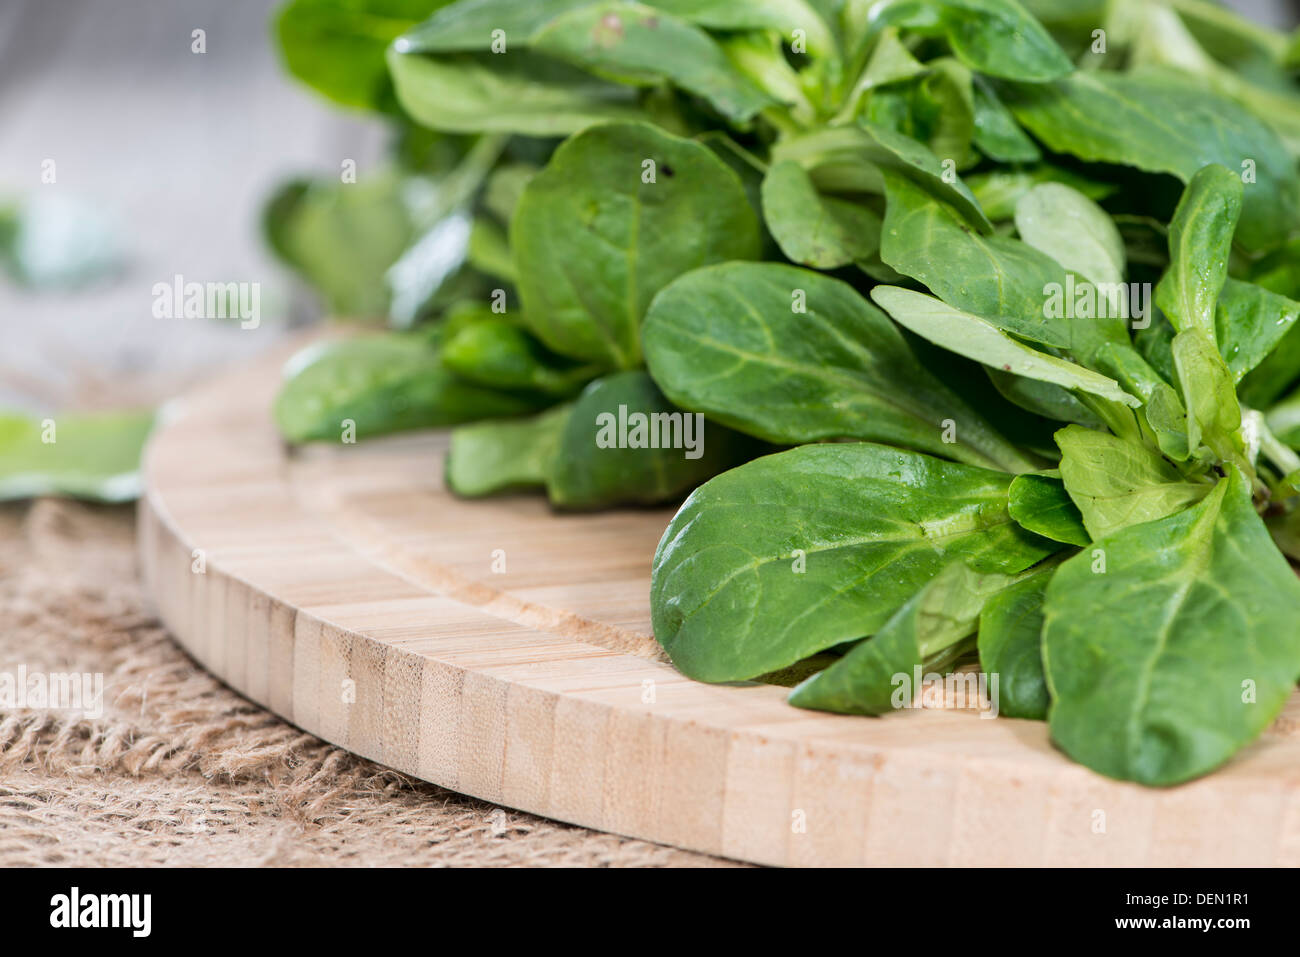 Portion of Lamb's Lettuce on vintage wooden background Stock Photo